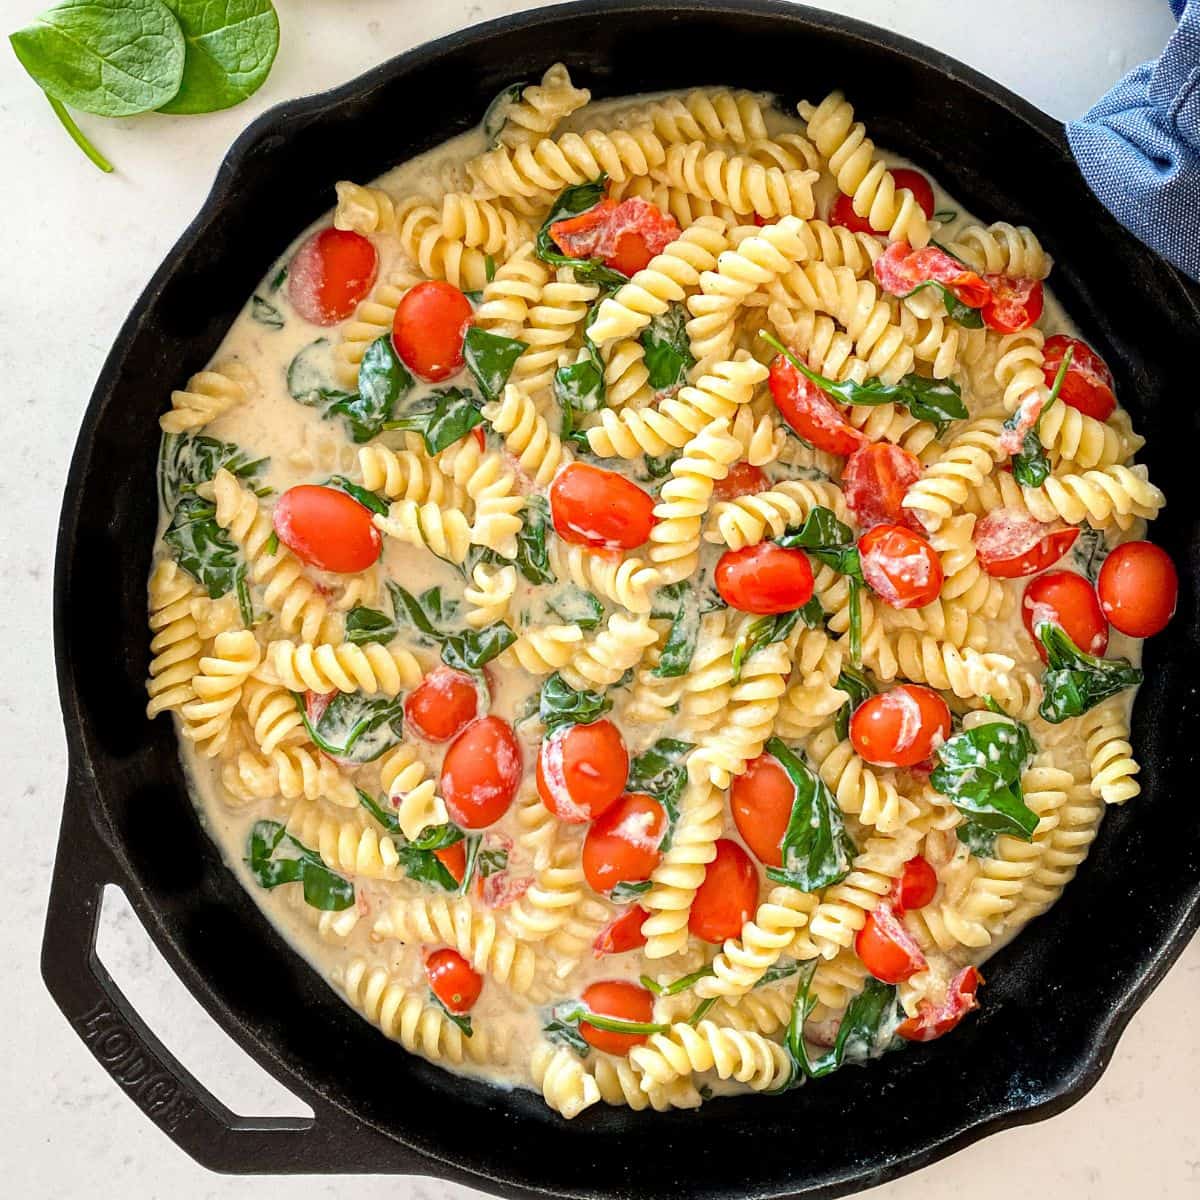 Cast iron pan with rotini pasta, cherry tomatoes and spinach in a white sauce.